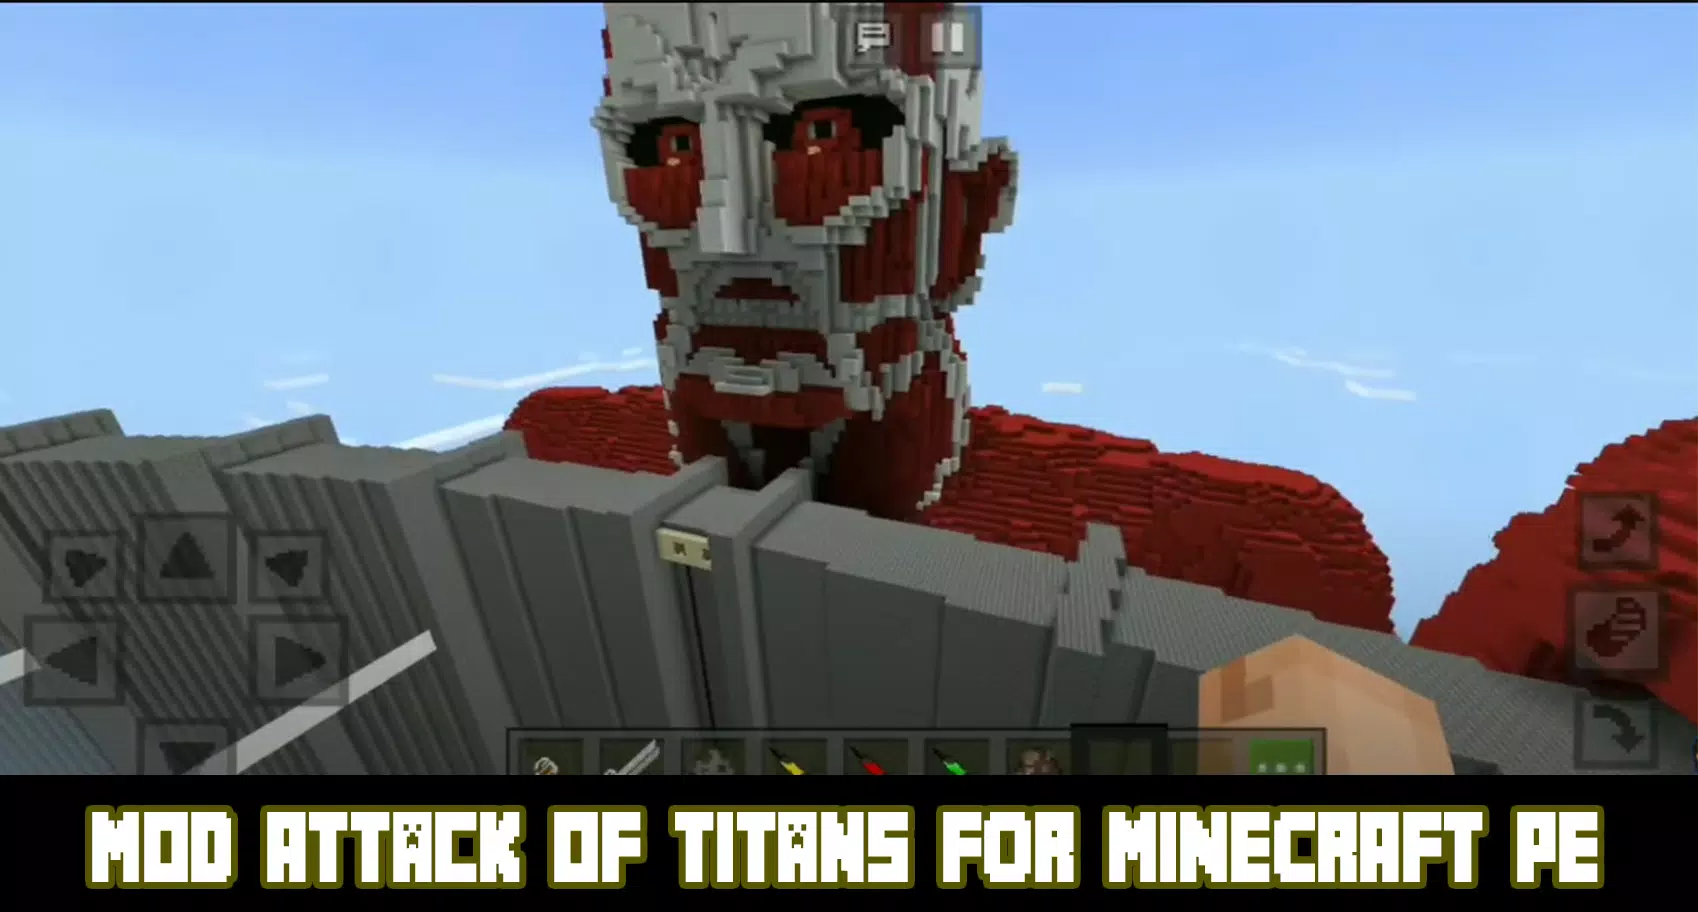 Mod Attack💥 of Titans💥 For Minecraft PE💖 APK pour Android Télécharger